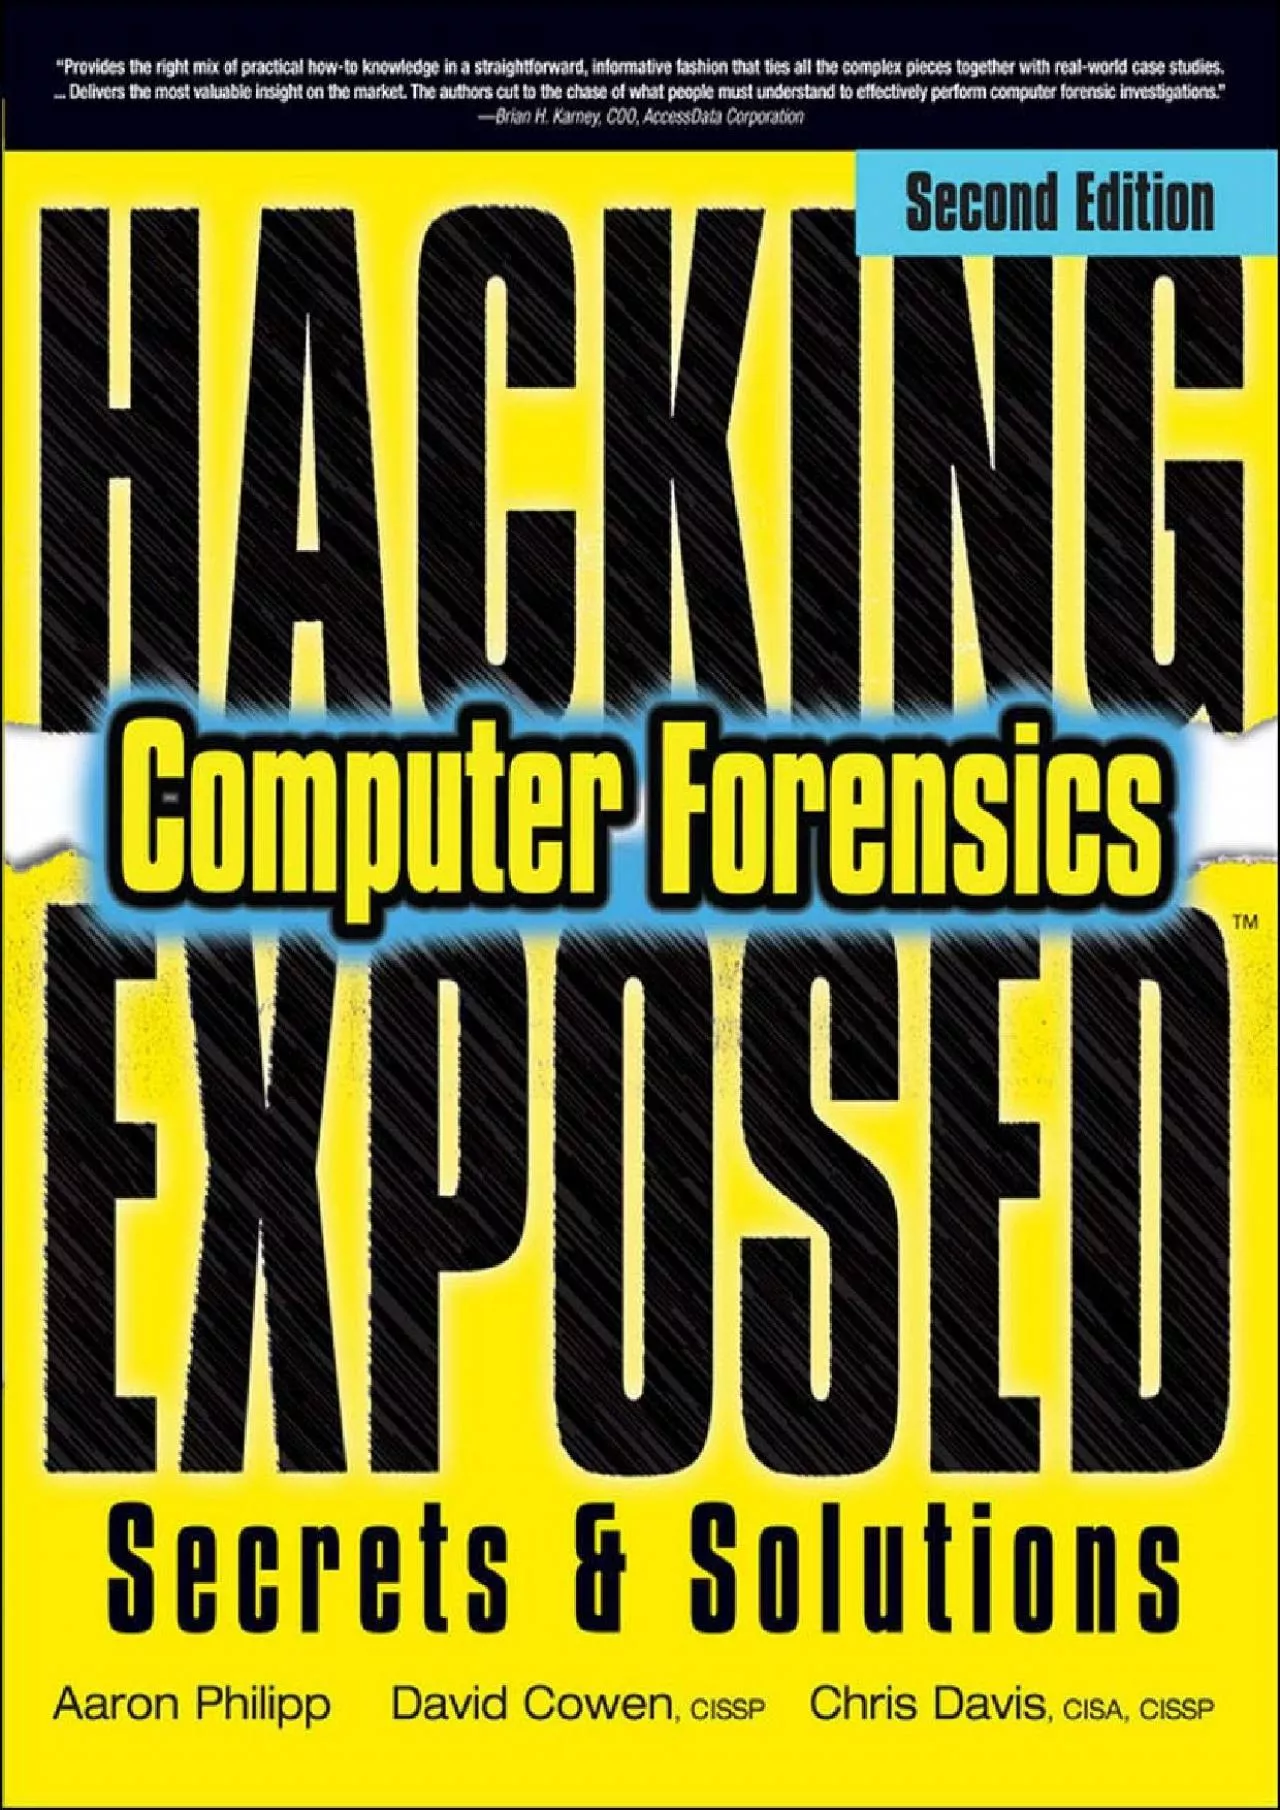 (DOWNLOAD)-Hacking Exposed Computer Forensics, Second Edition: Computer Forensics Secrets